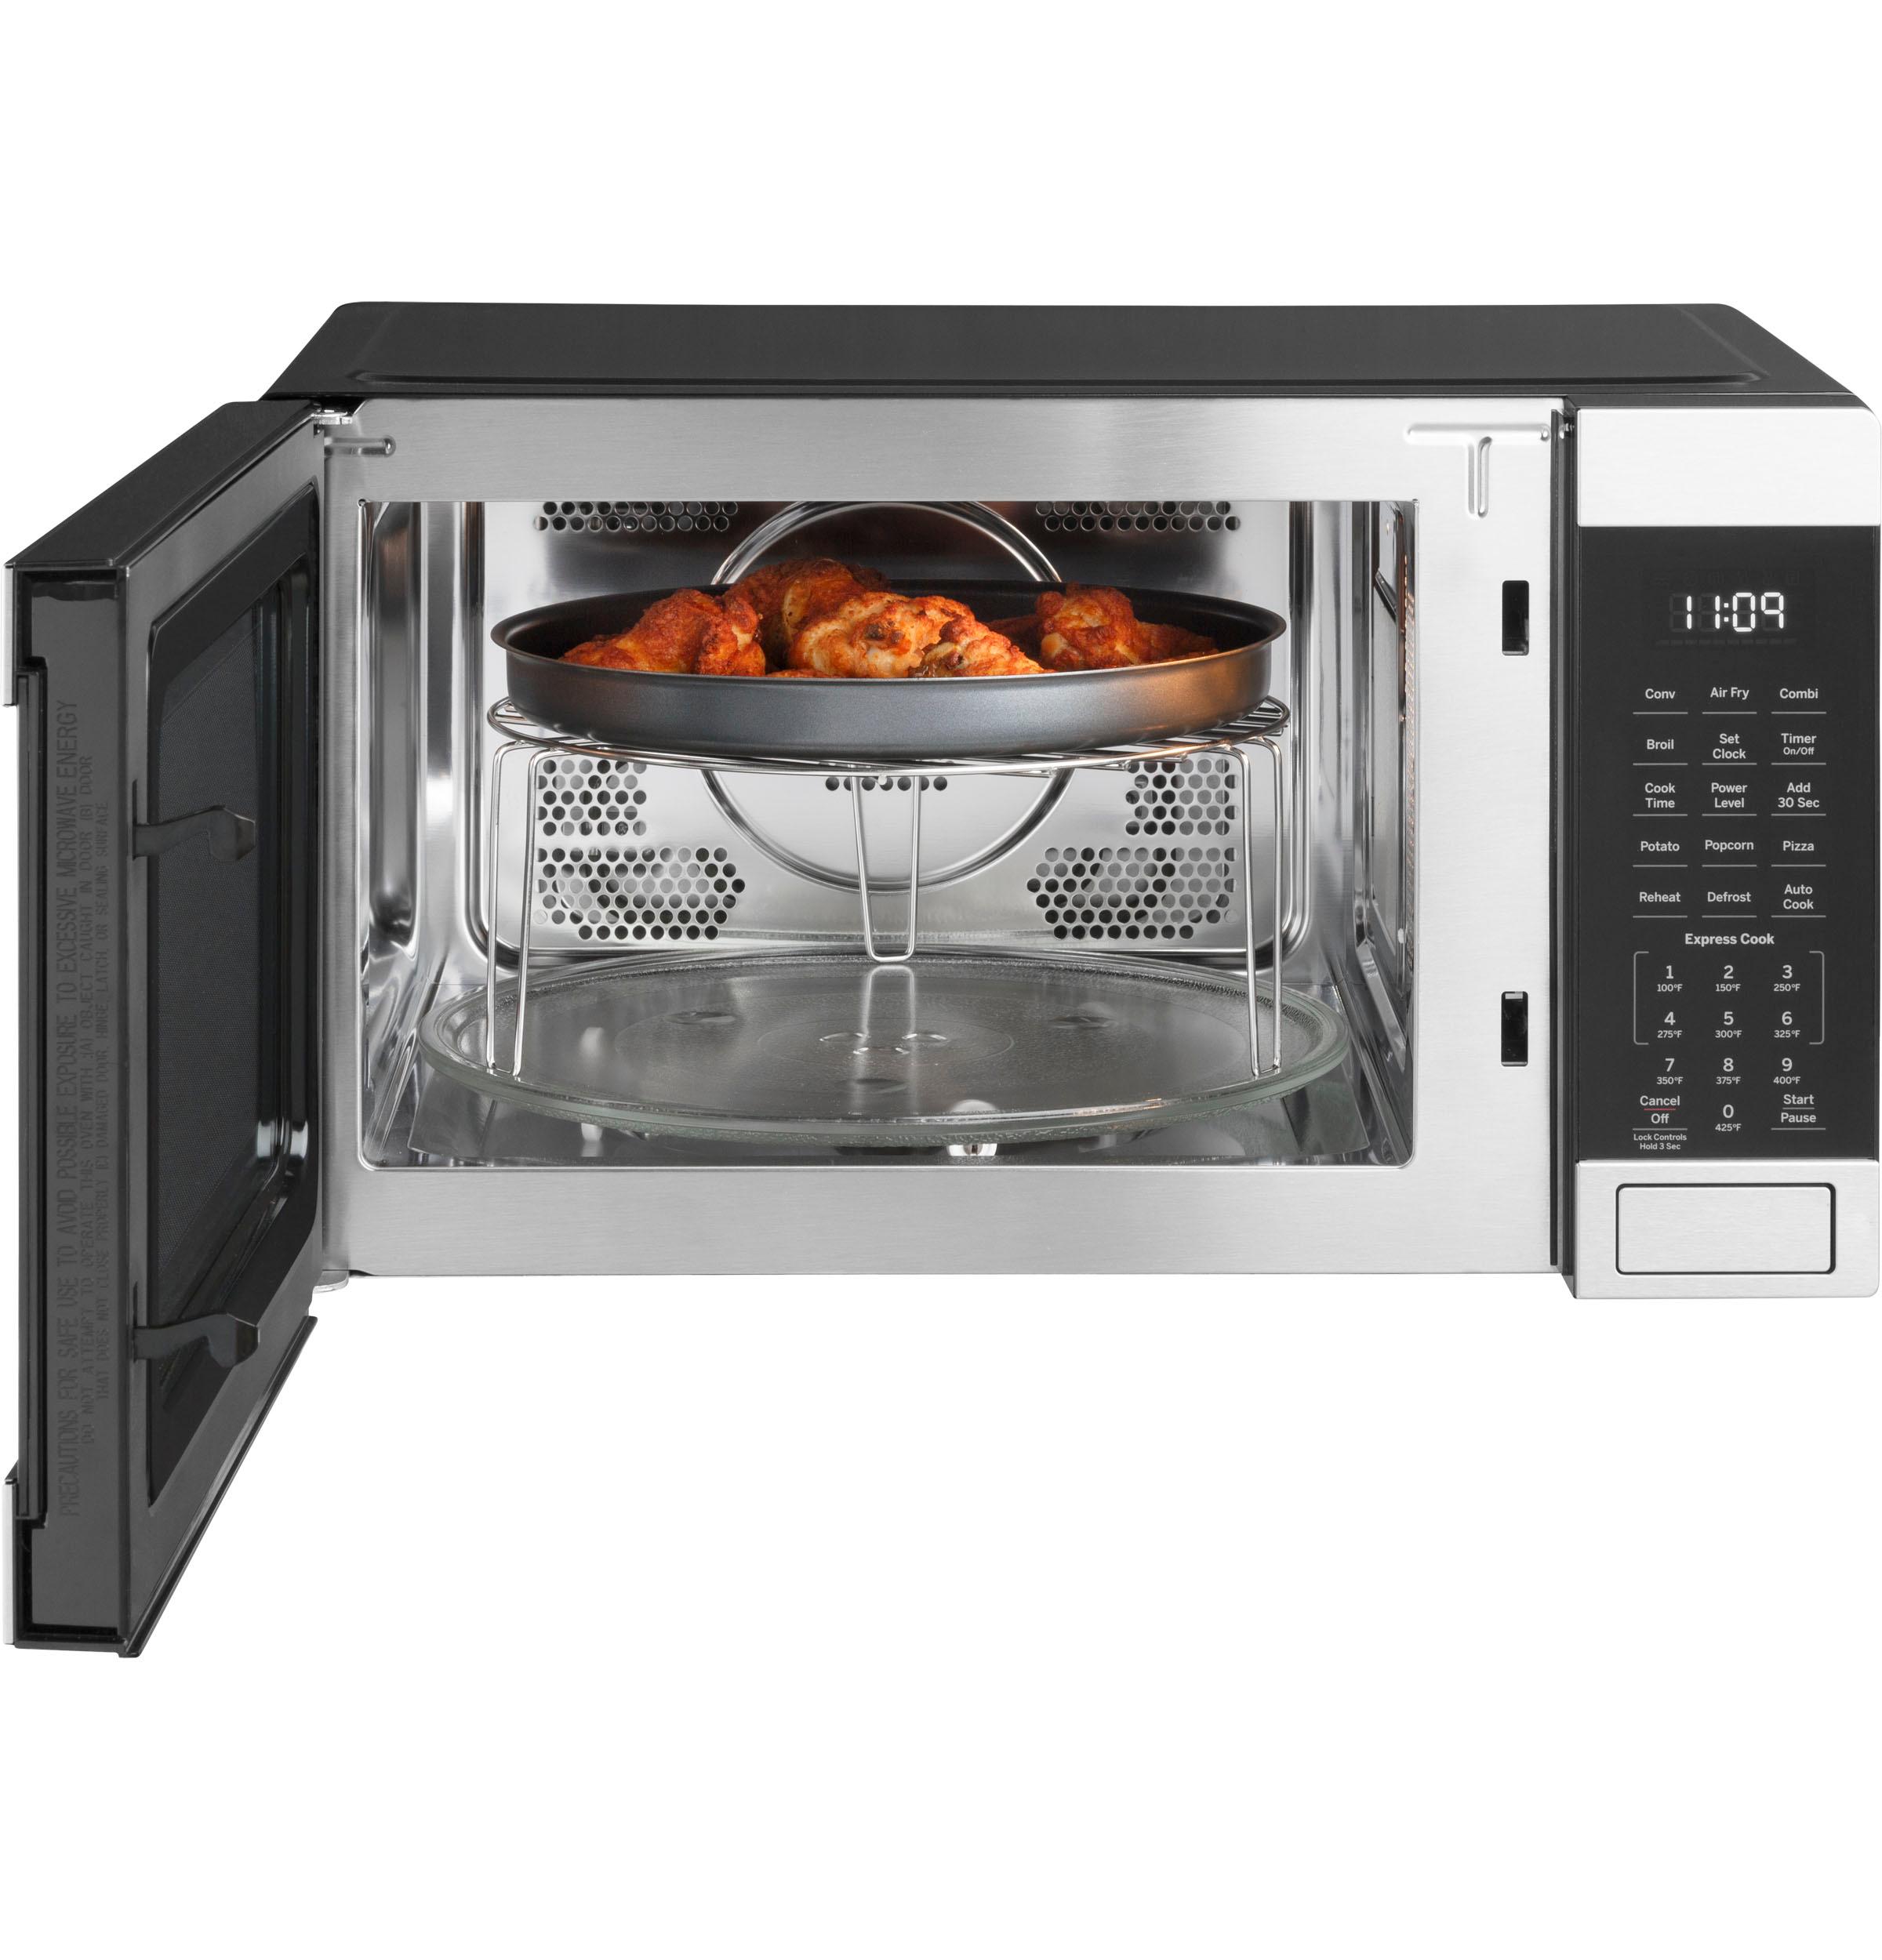 GE® 1.0 Cu. Ft. Capacity Countertop Convection Microwave Oven with Air Fry